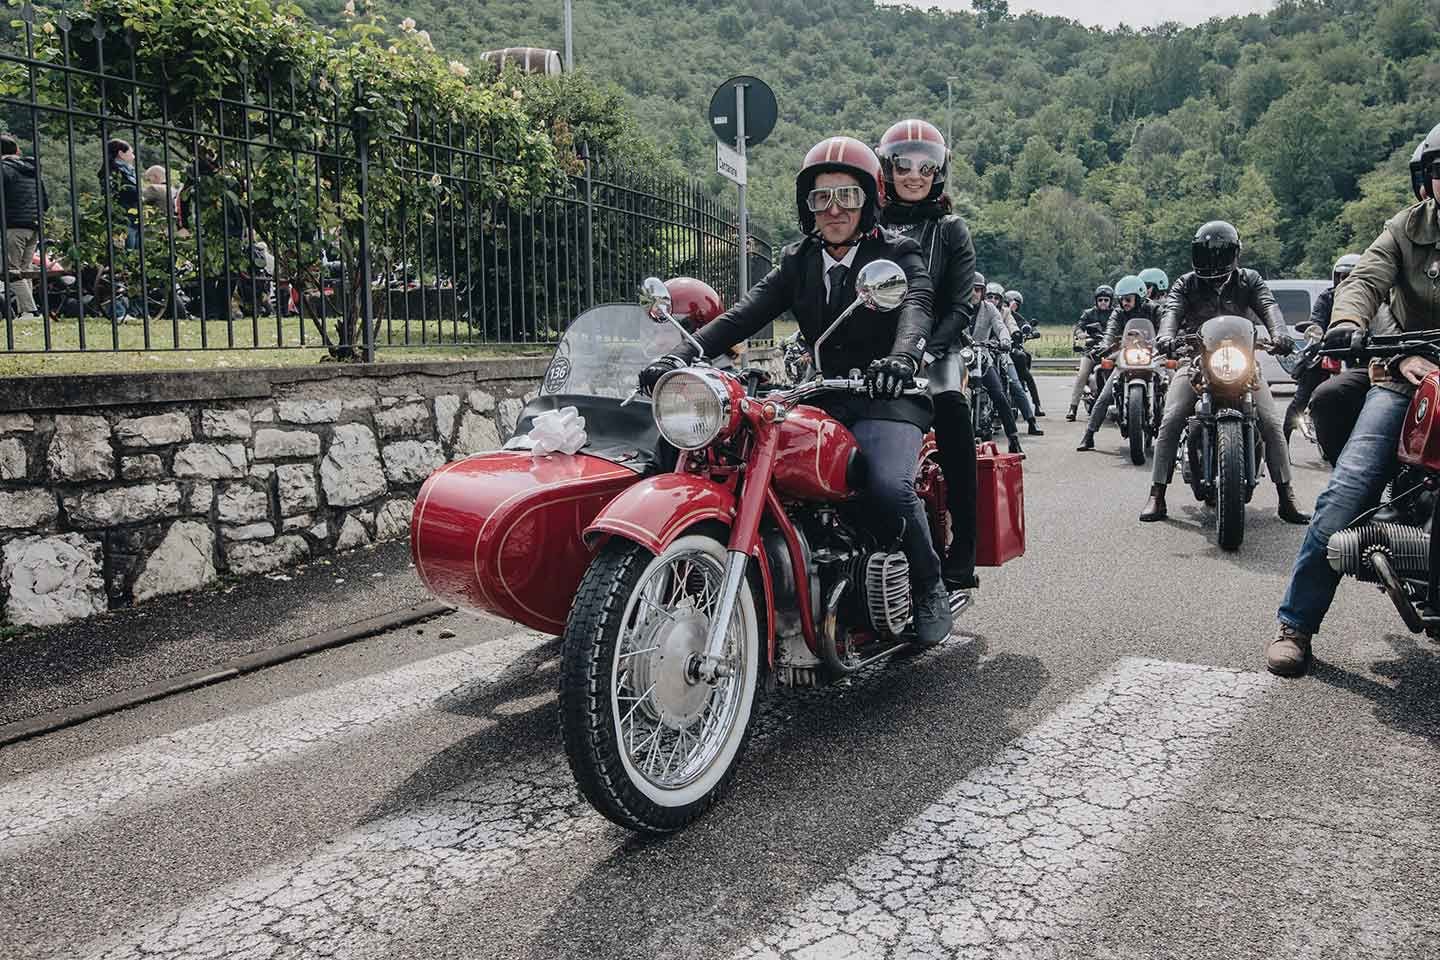 An Italian rider (and distinguished gentleman) with lady pillion rider and unidentified sidecar passenger, Brescia, Italy.